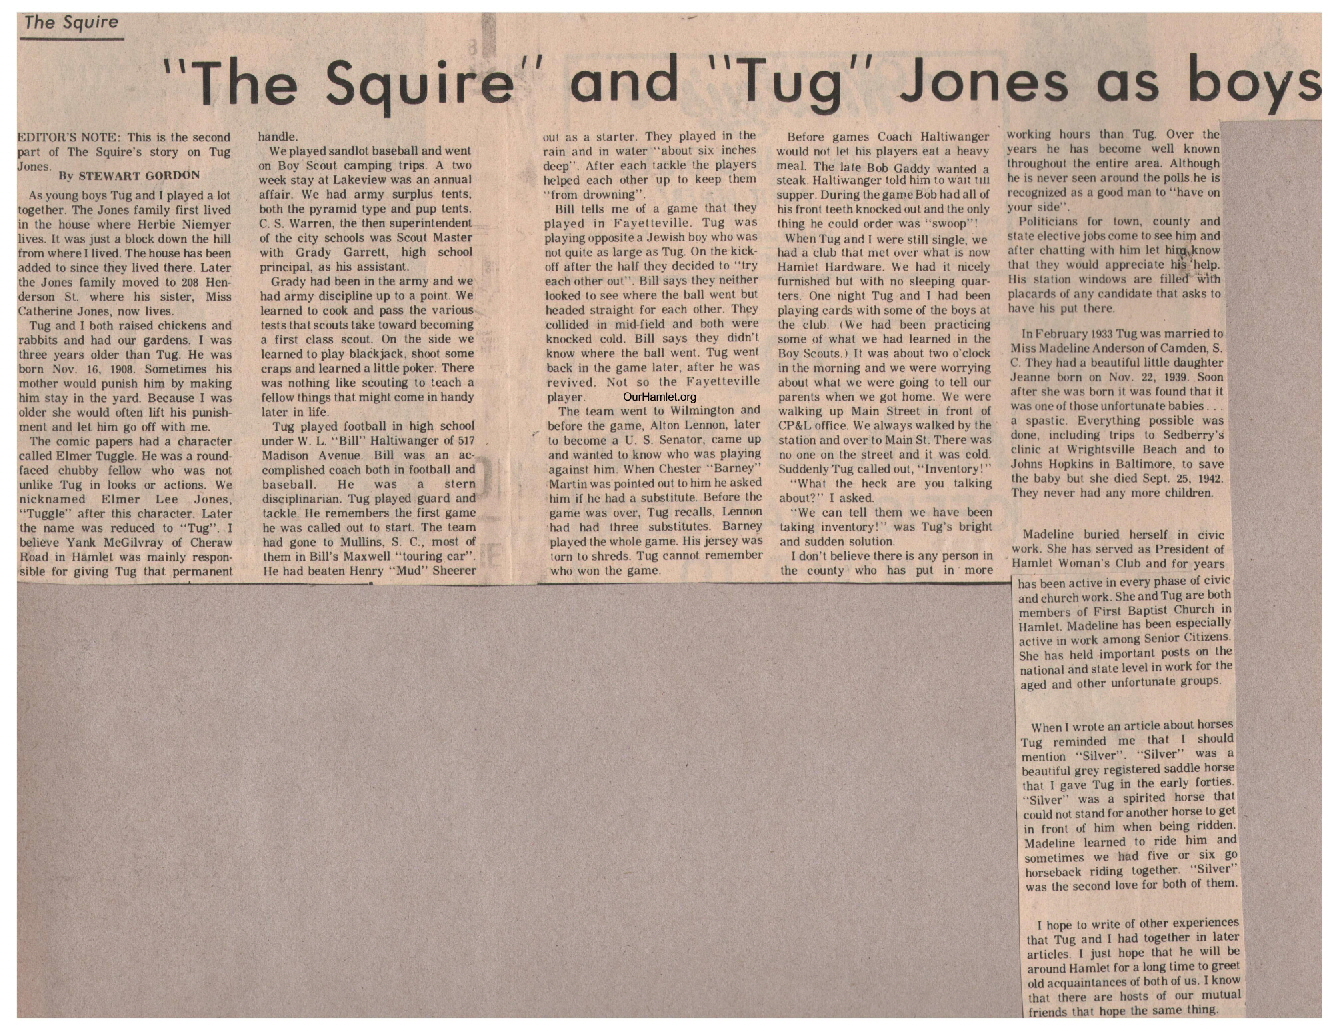 The Squire - Squire and Tug Jones as boys a OH